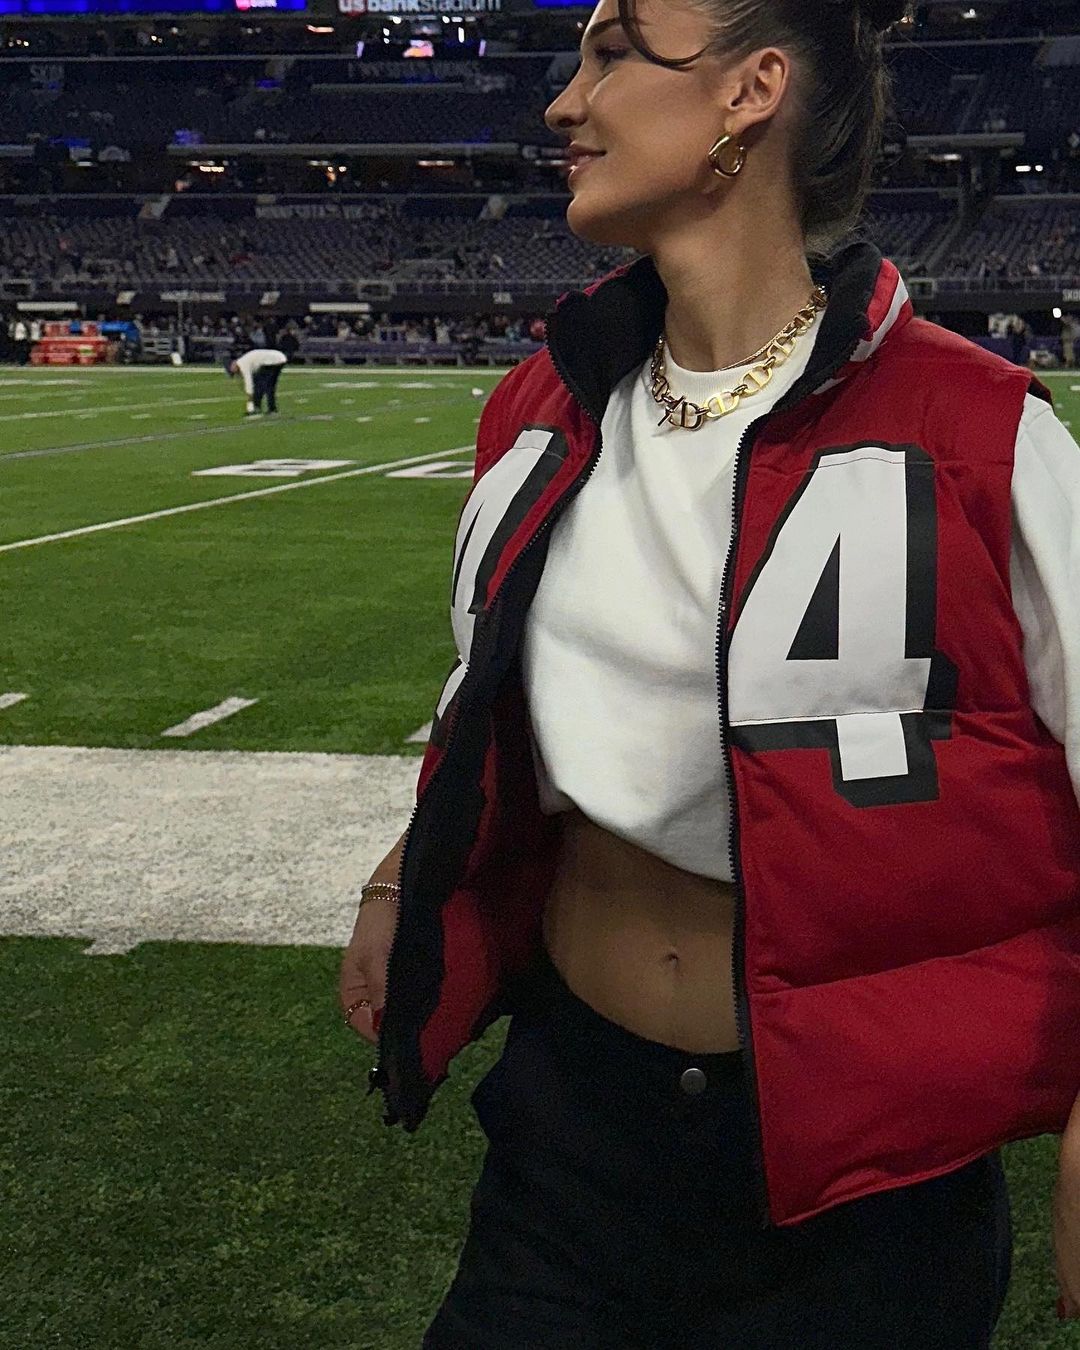 Kristin Juszczyk is the Wag Going Viral Thanks to Taylor Swift! - Photo 16